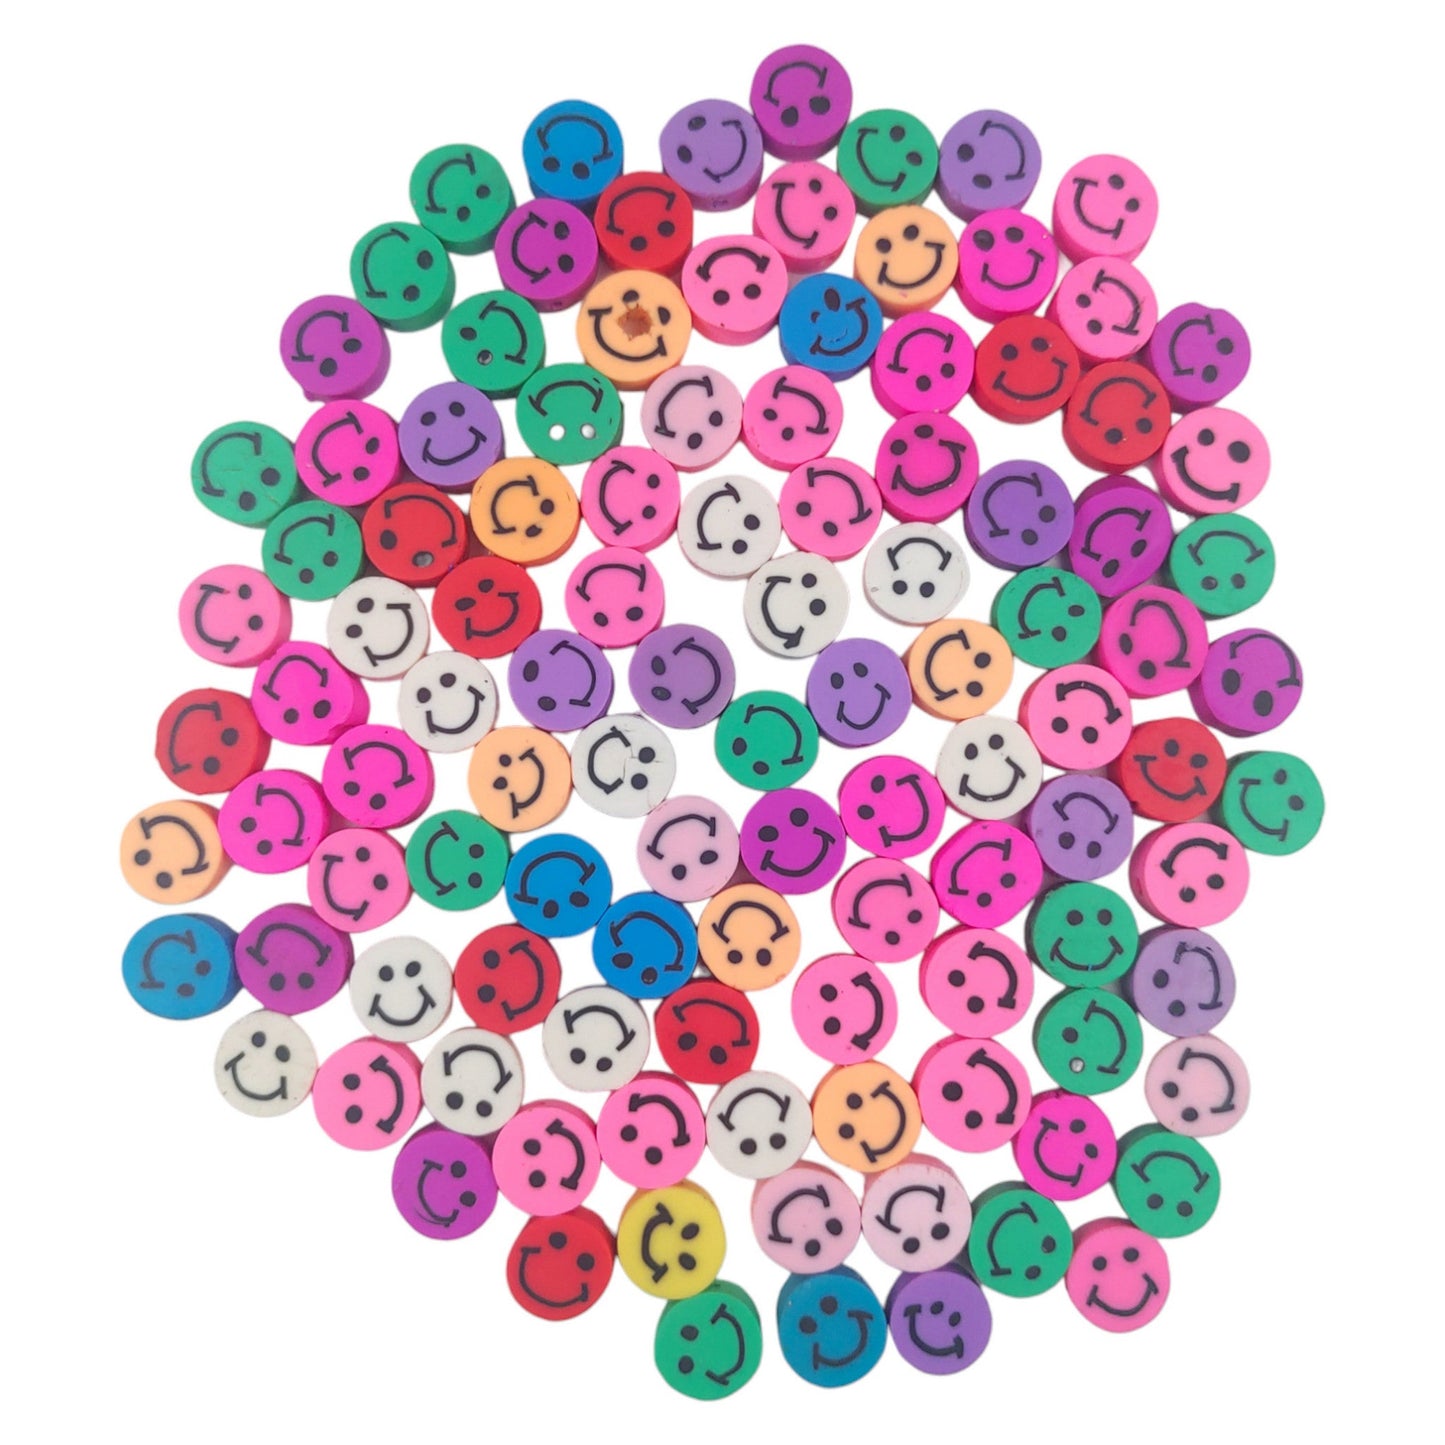 Smiley Face Shape Soft Resin Motif For Crafting or Decor - 13534